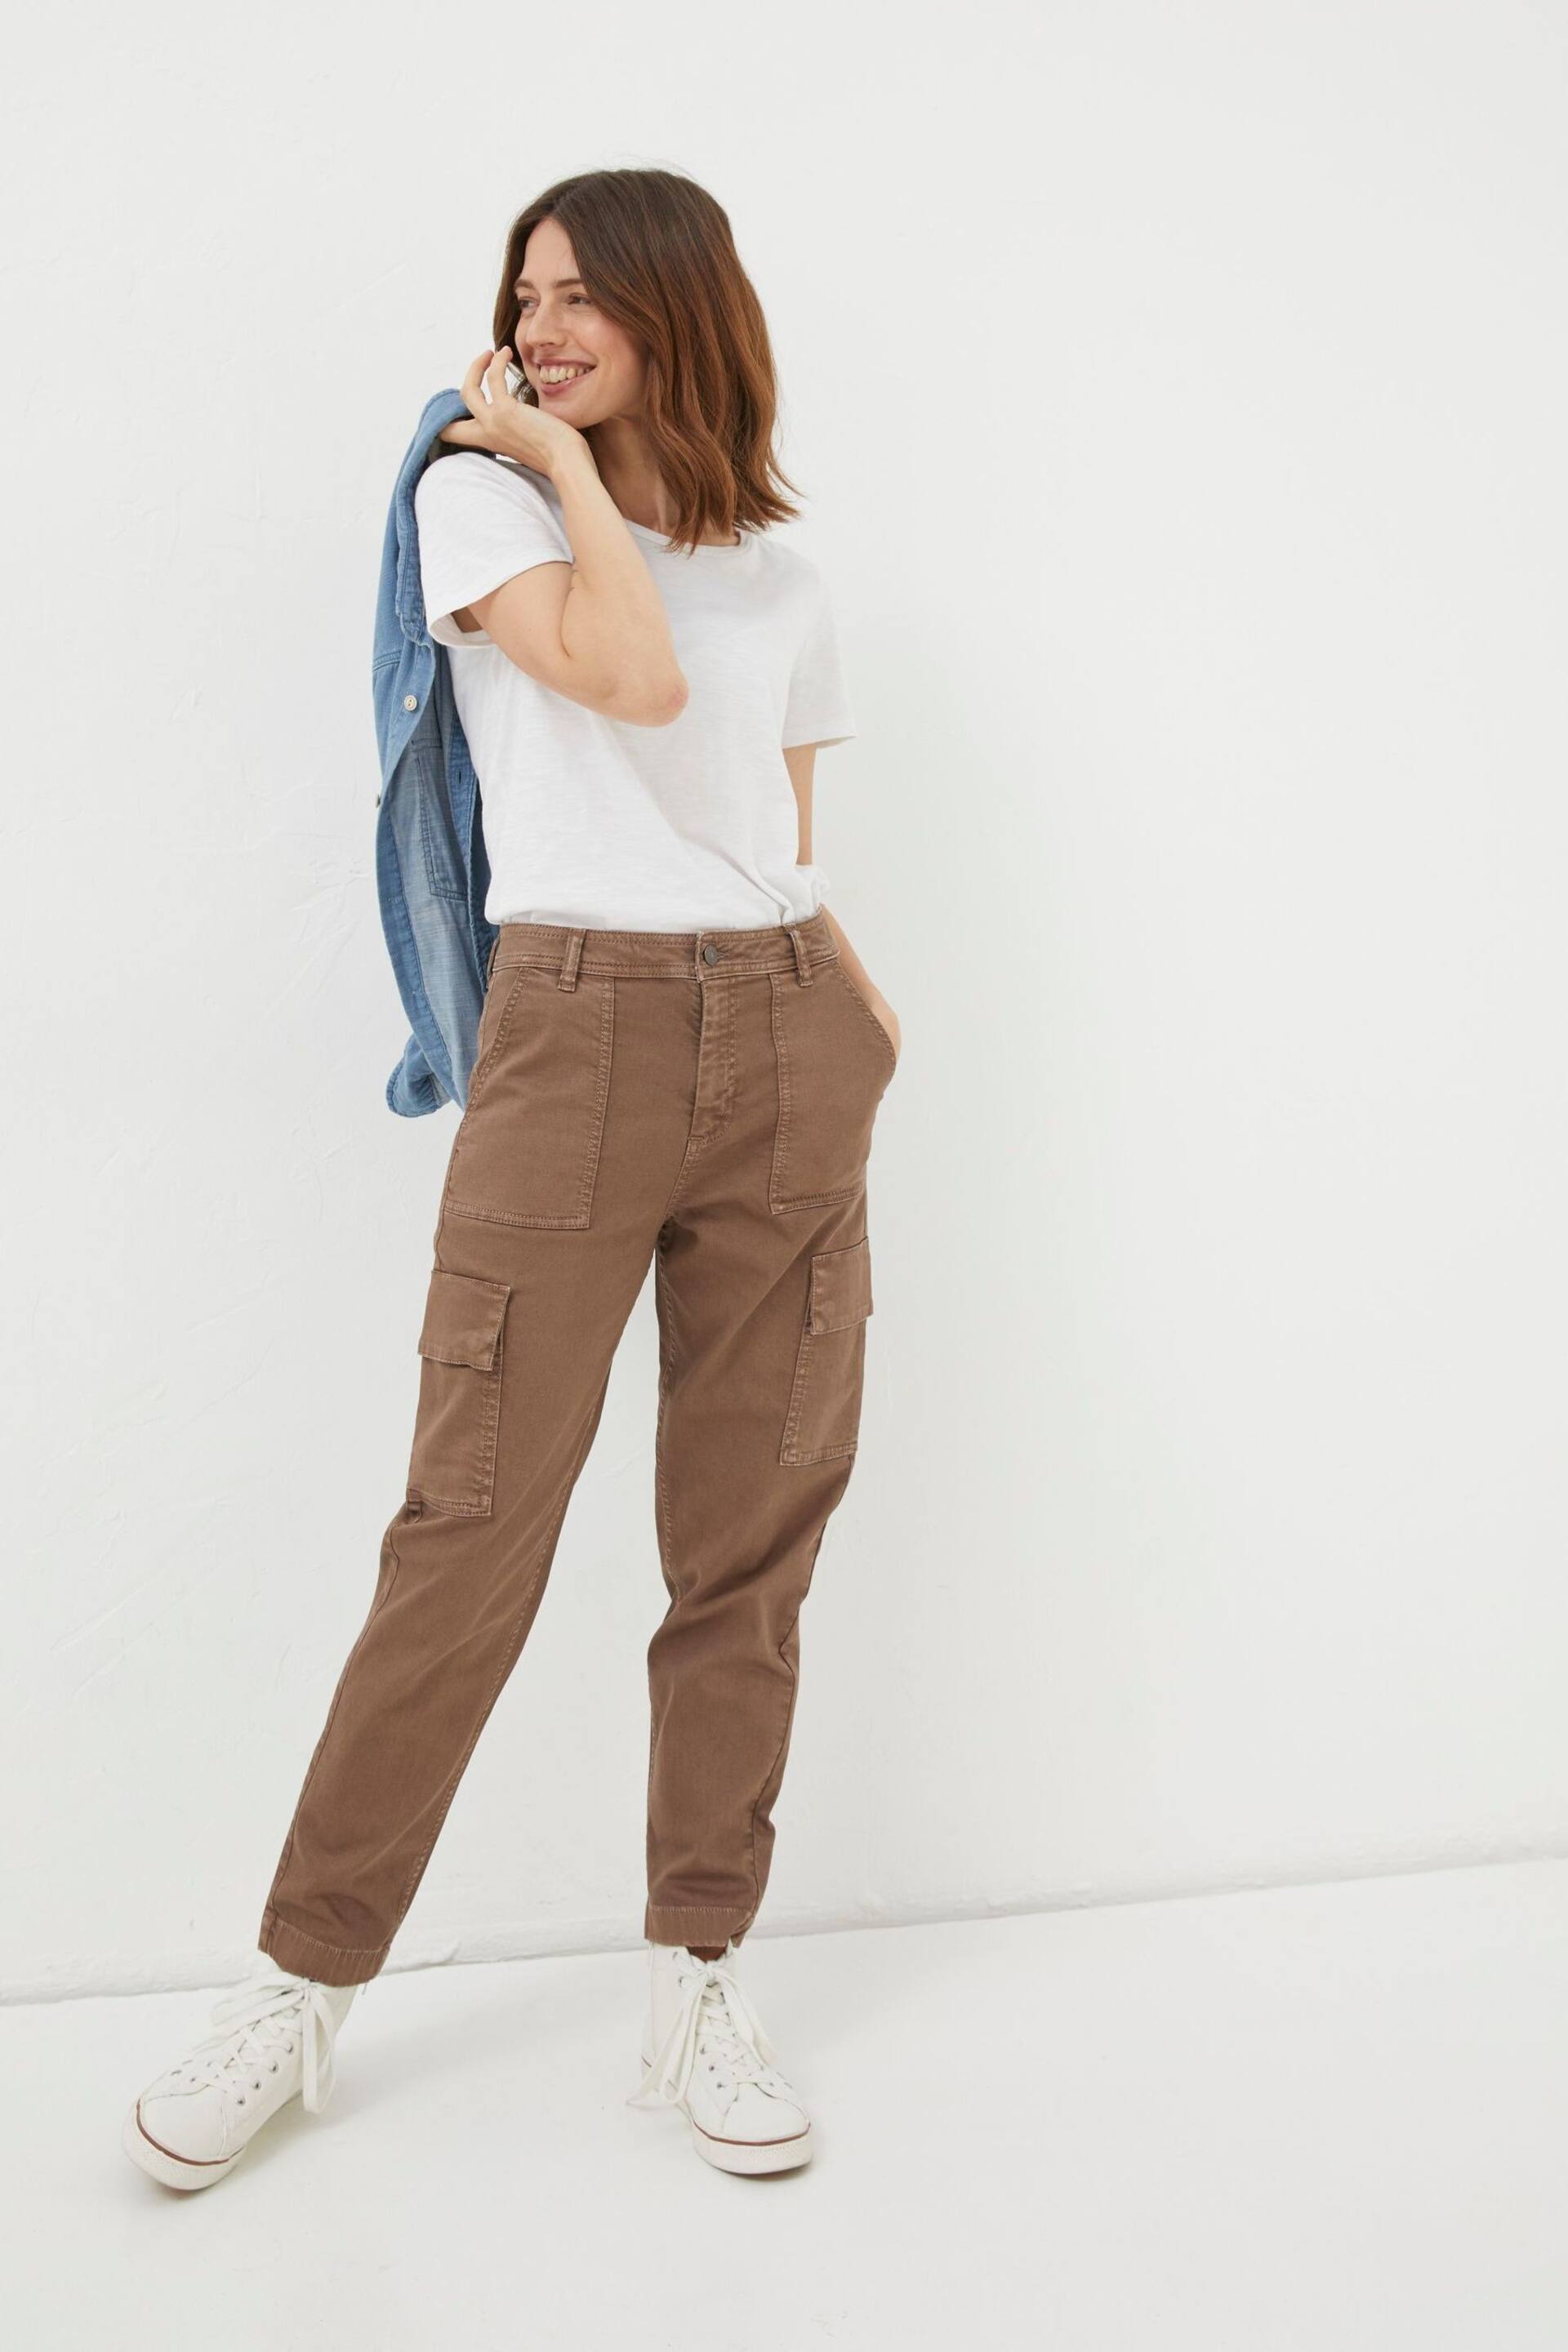 FatFace Brown Aspen Cargo Chino Trousers - Image 6 of 6